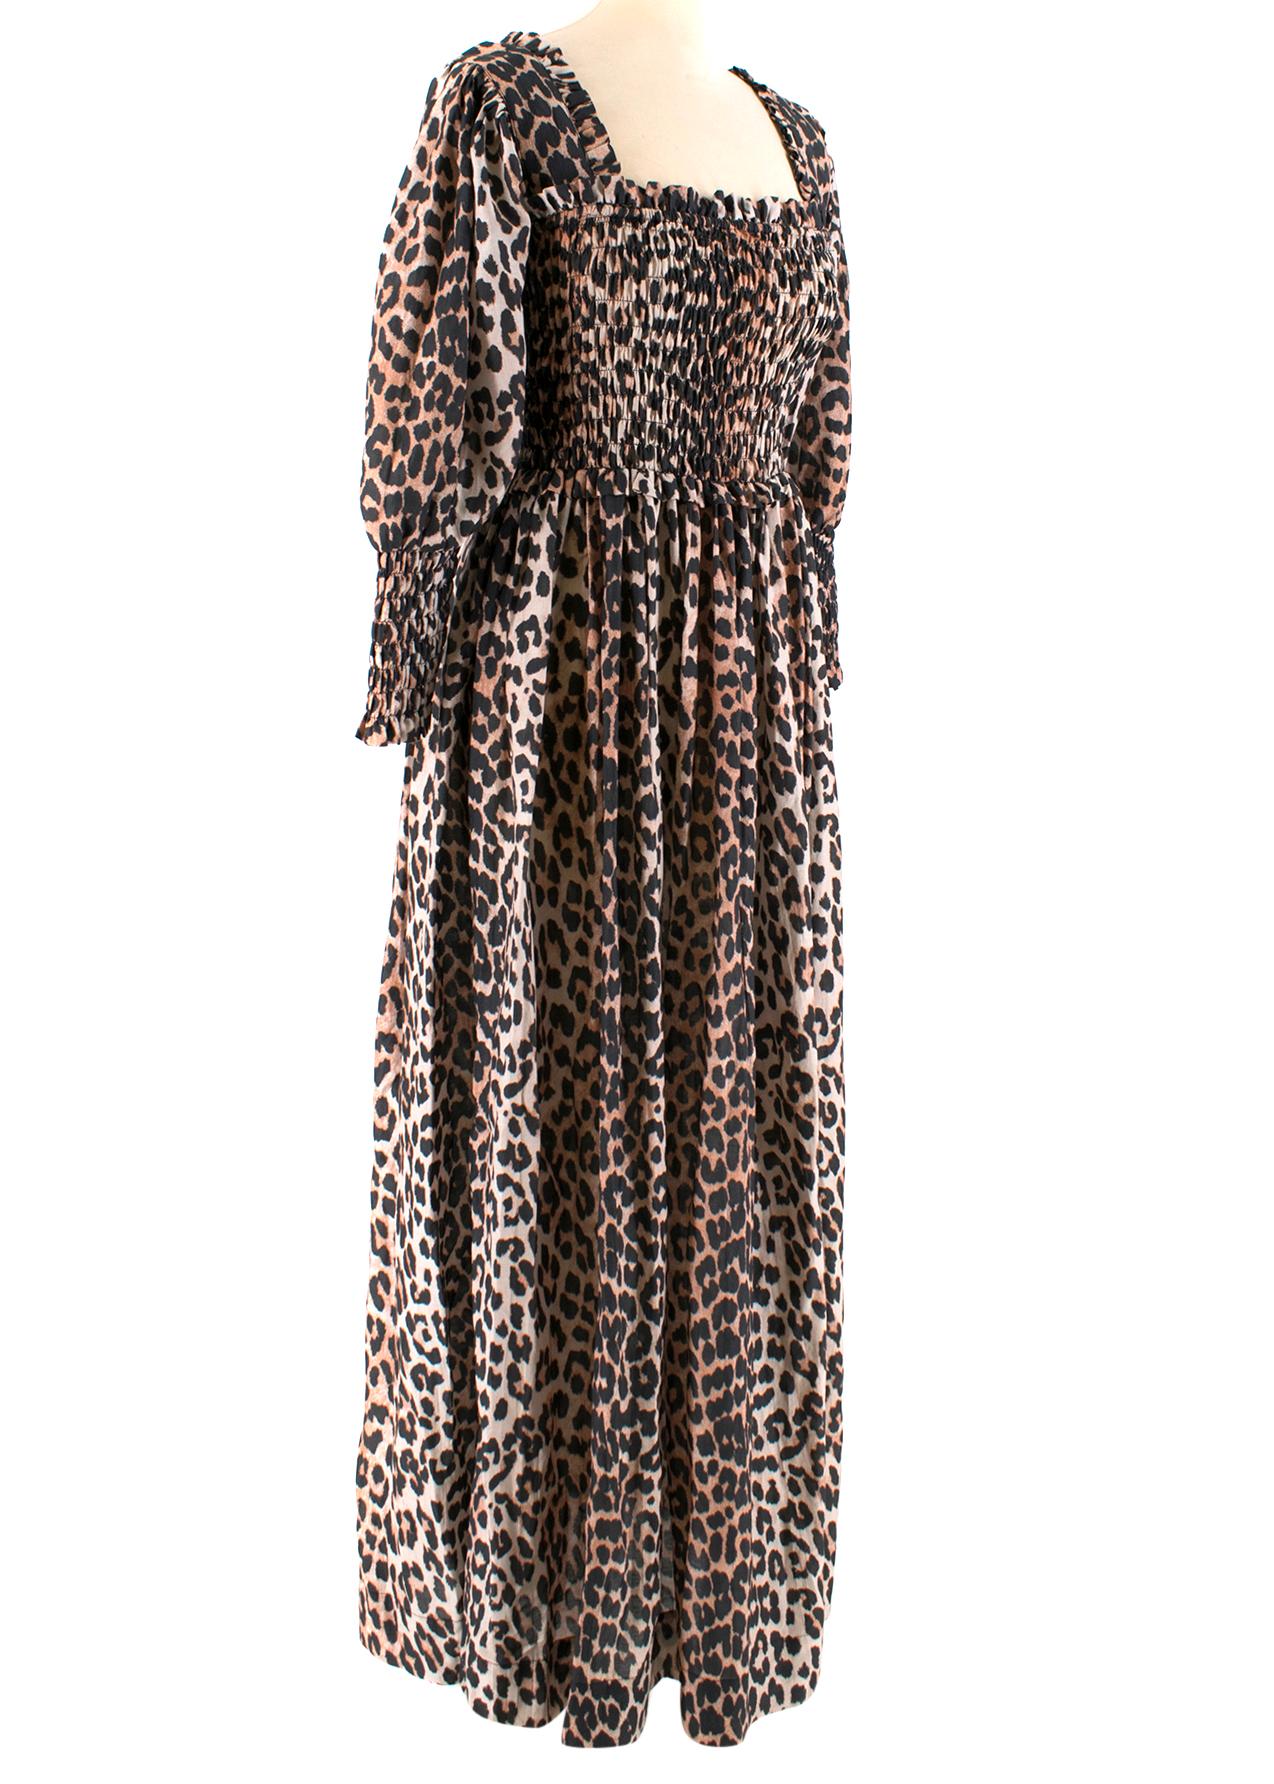 Ganni Leopard Print Silk Dress

Square neck 
Leopard printed dress
Stretch material 
Balloon sleeves 
Shirred ruching around chest and sleeves
Long dress
Light weight material 

Please note, these items are pre-owned and may show some signs of